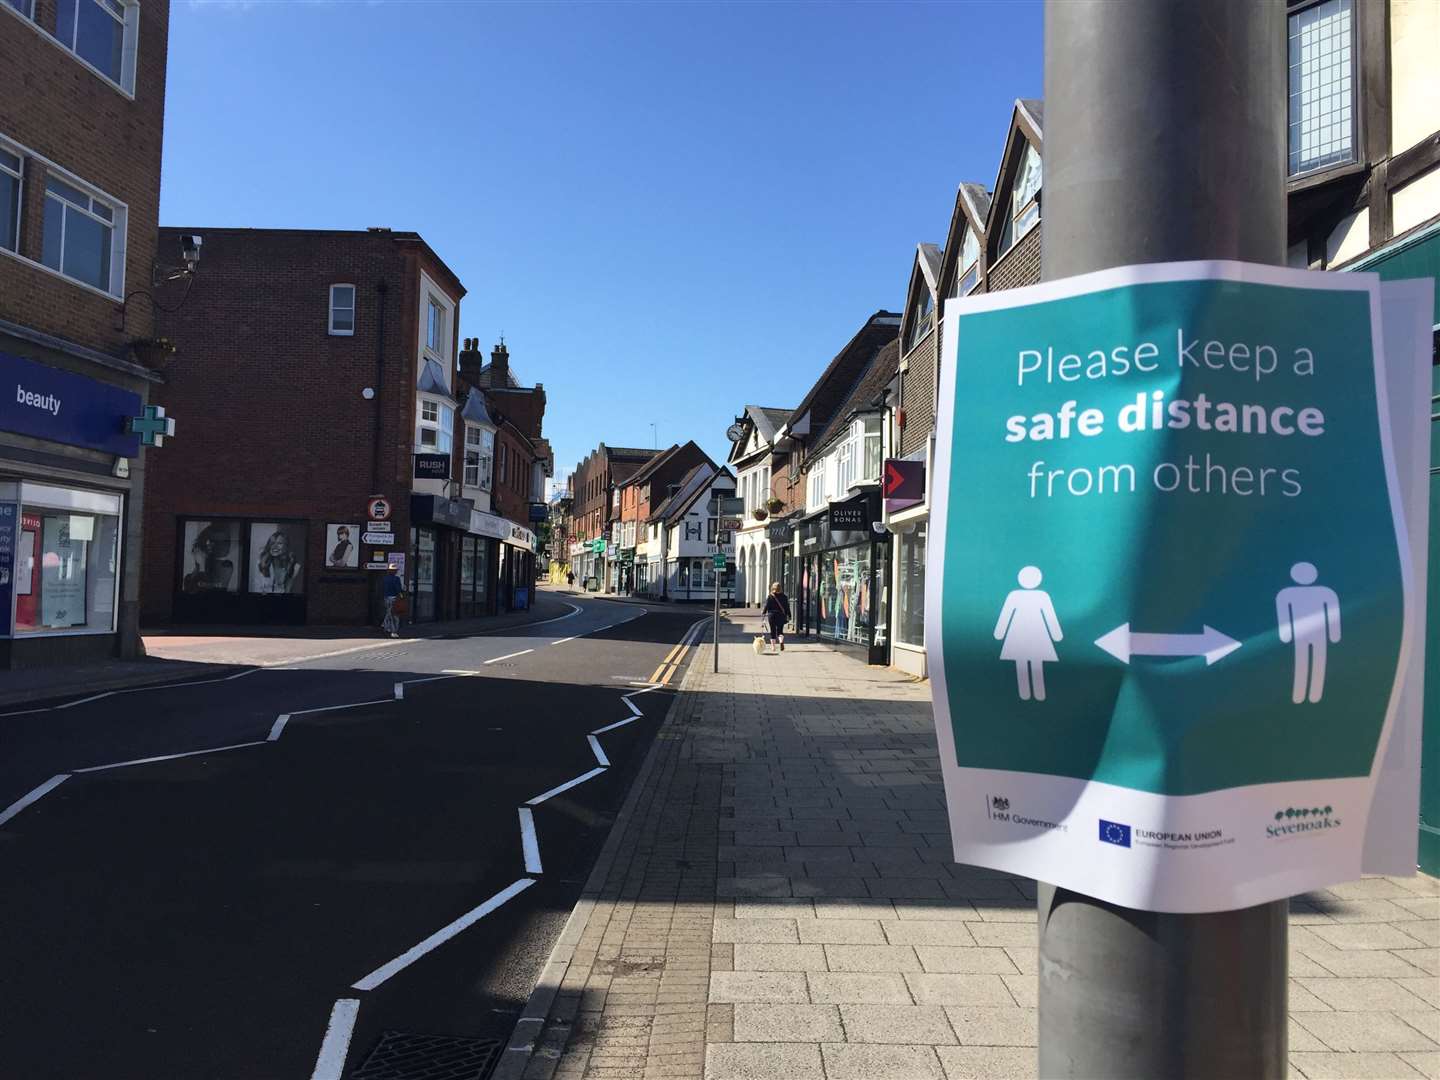 Signs in Sevenoaks as shops reopen for the first time since lockdown began